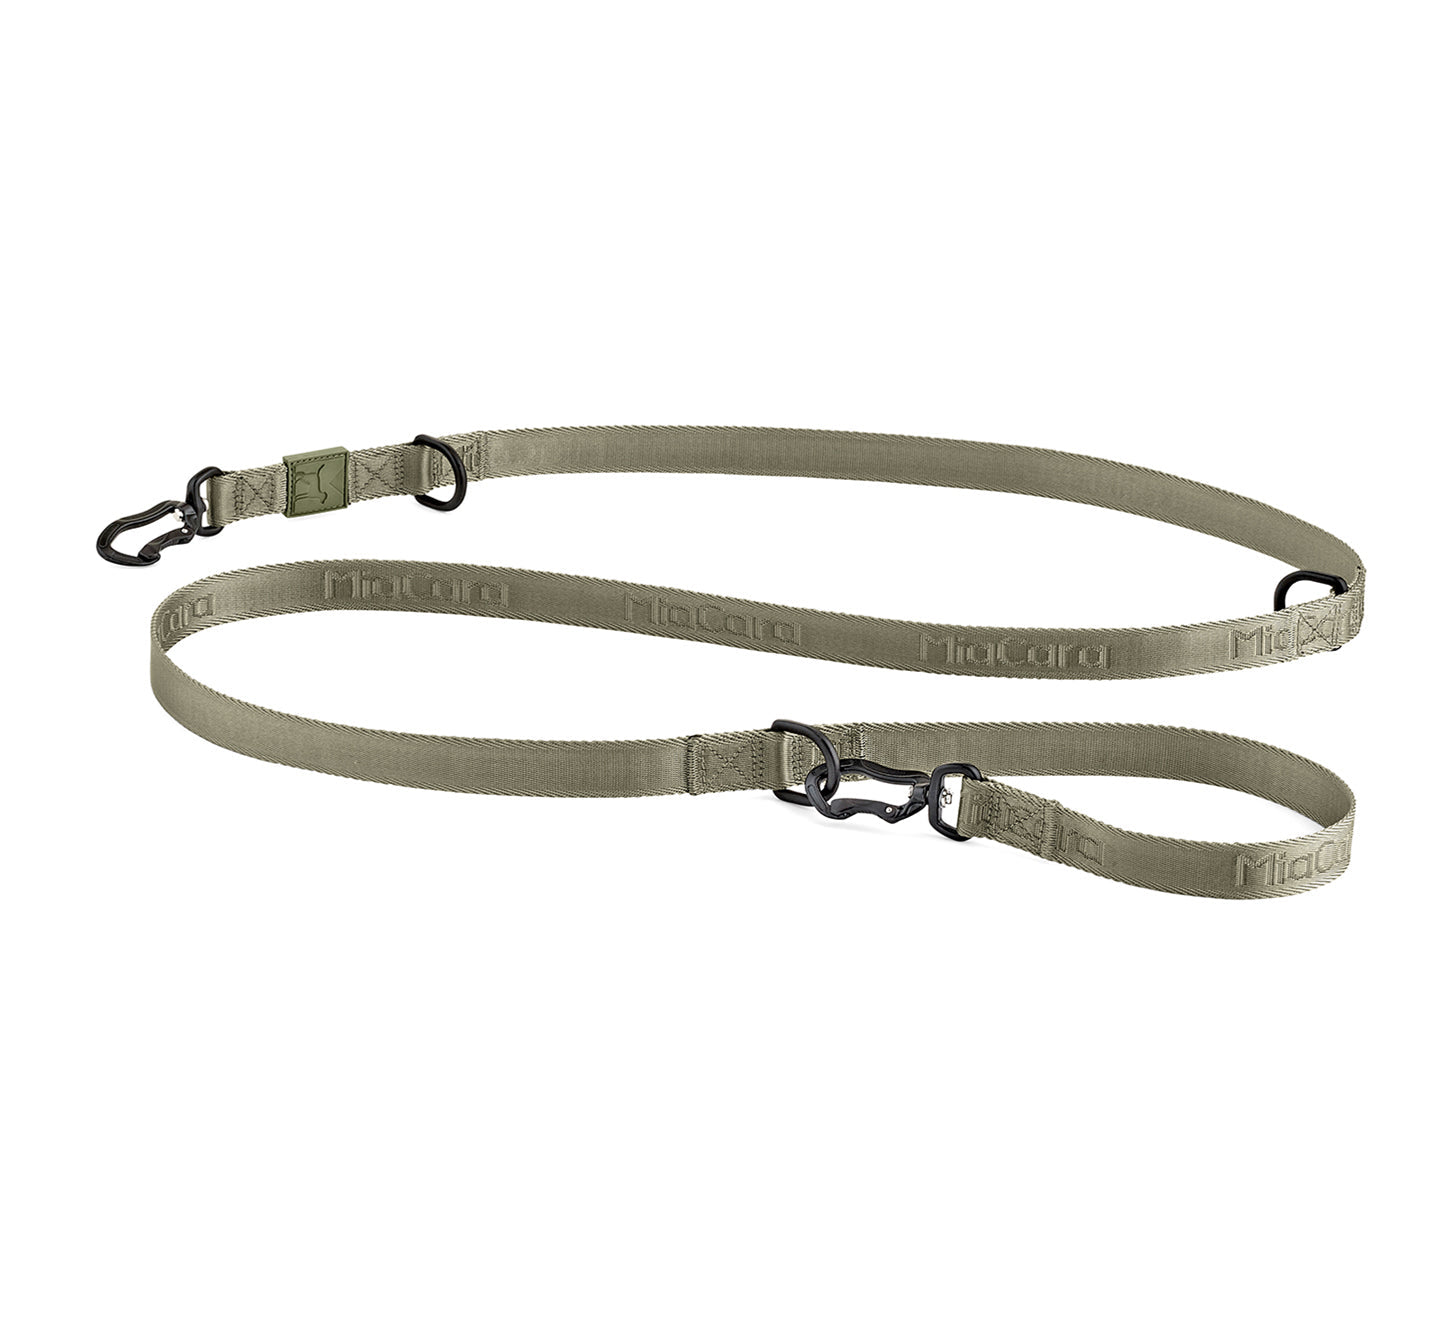 Easy-clean long dog leash for all-weather use